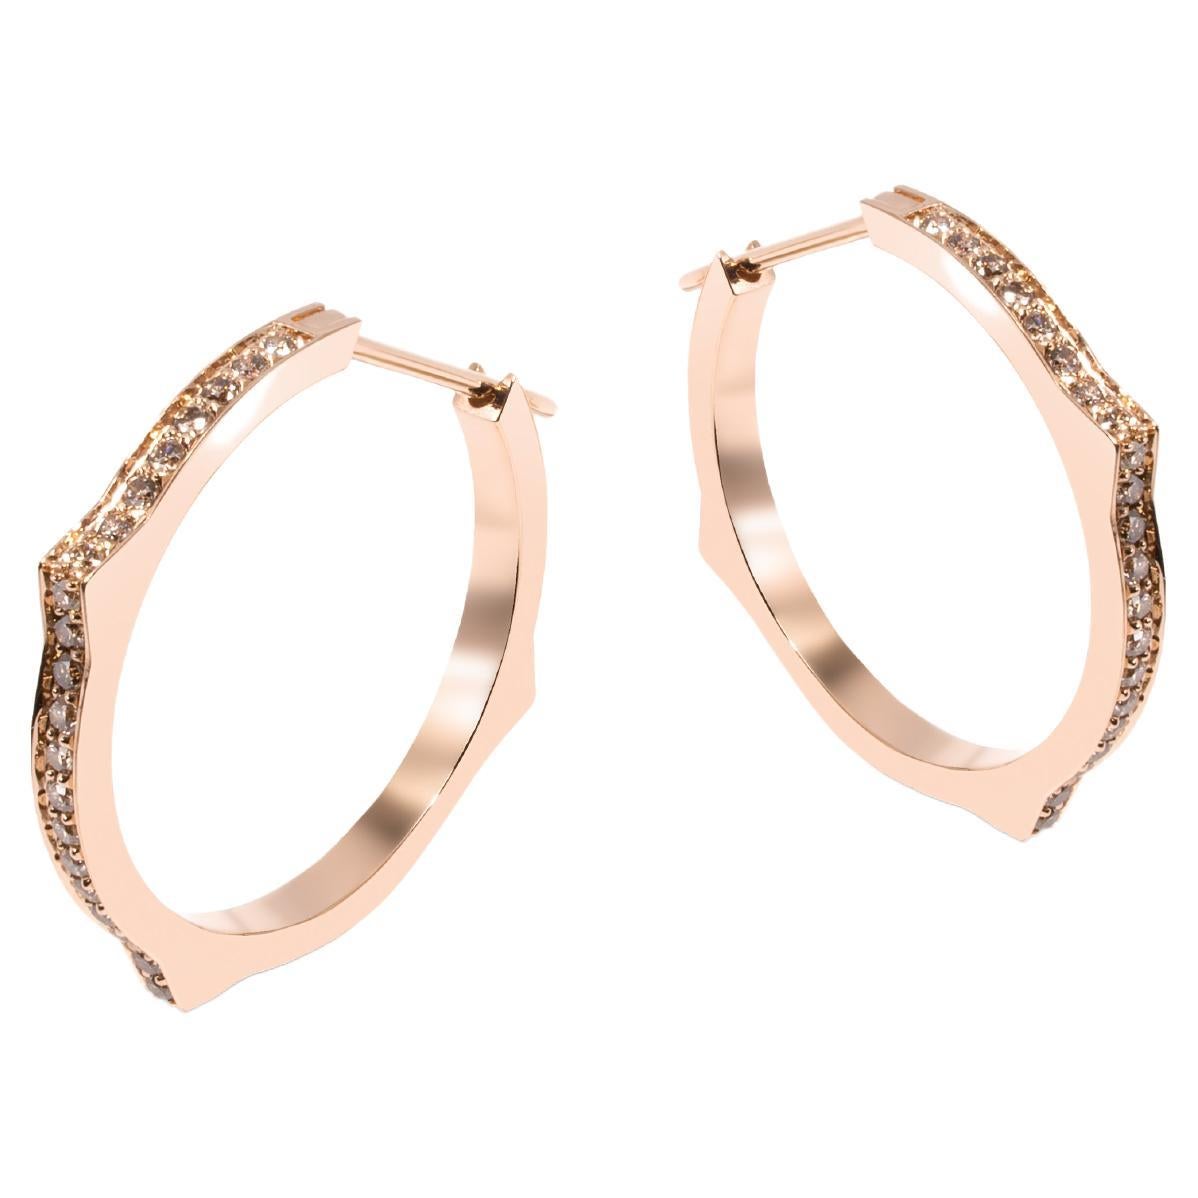 Mattioli Eve_r New Earrings in Rose Gold & Brown Diamonds For Sale